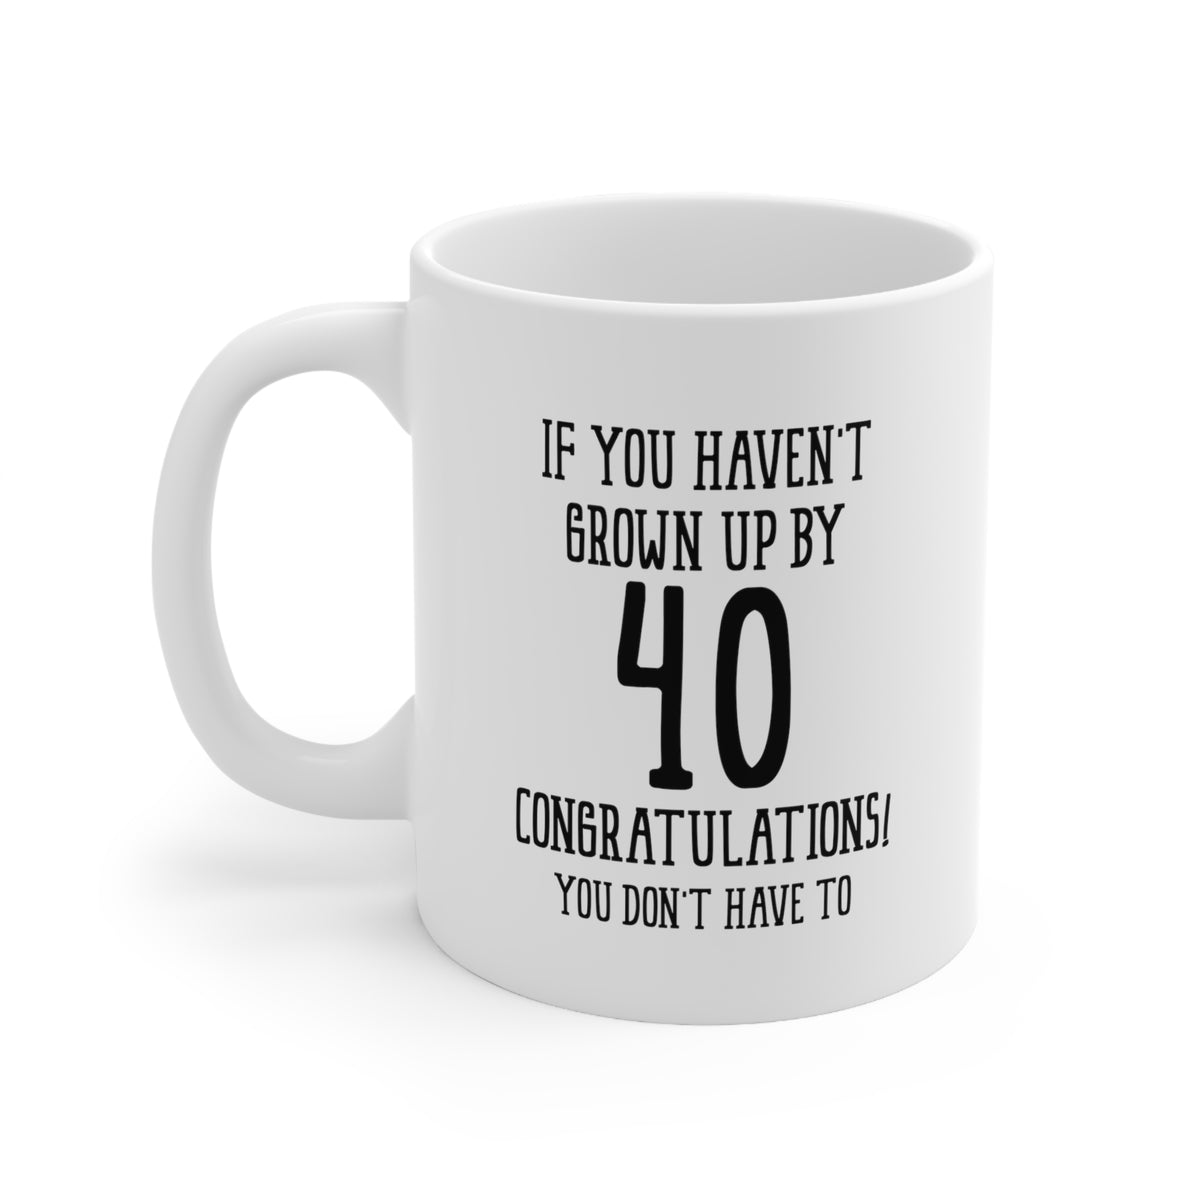 40th Funny Birthday Mug, If You Haven't Grown Up By 40 Congratulations! You Don't Have To, Happy Birthday For 50 Years Old Dad Mom Brother Sister